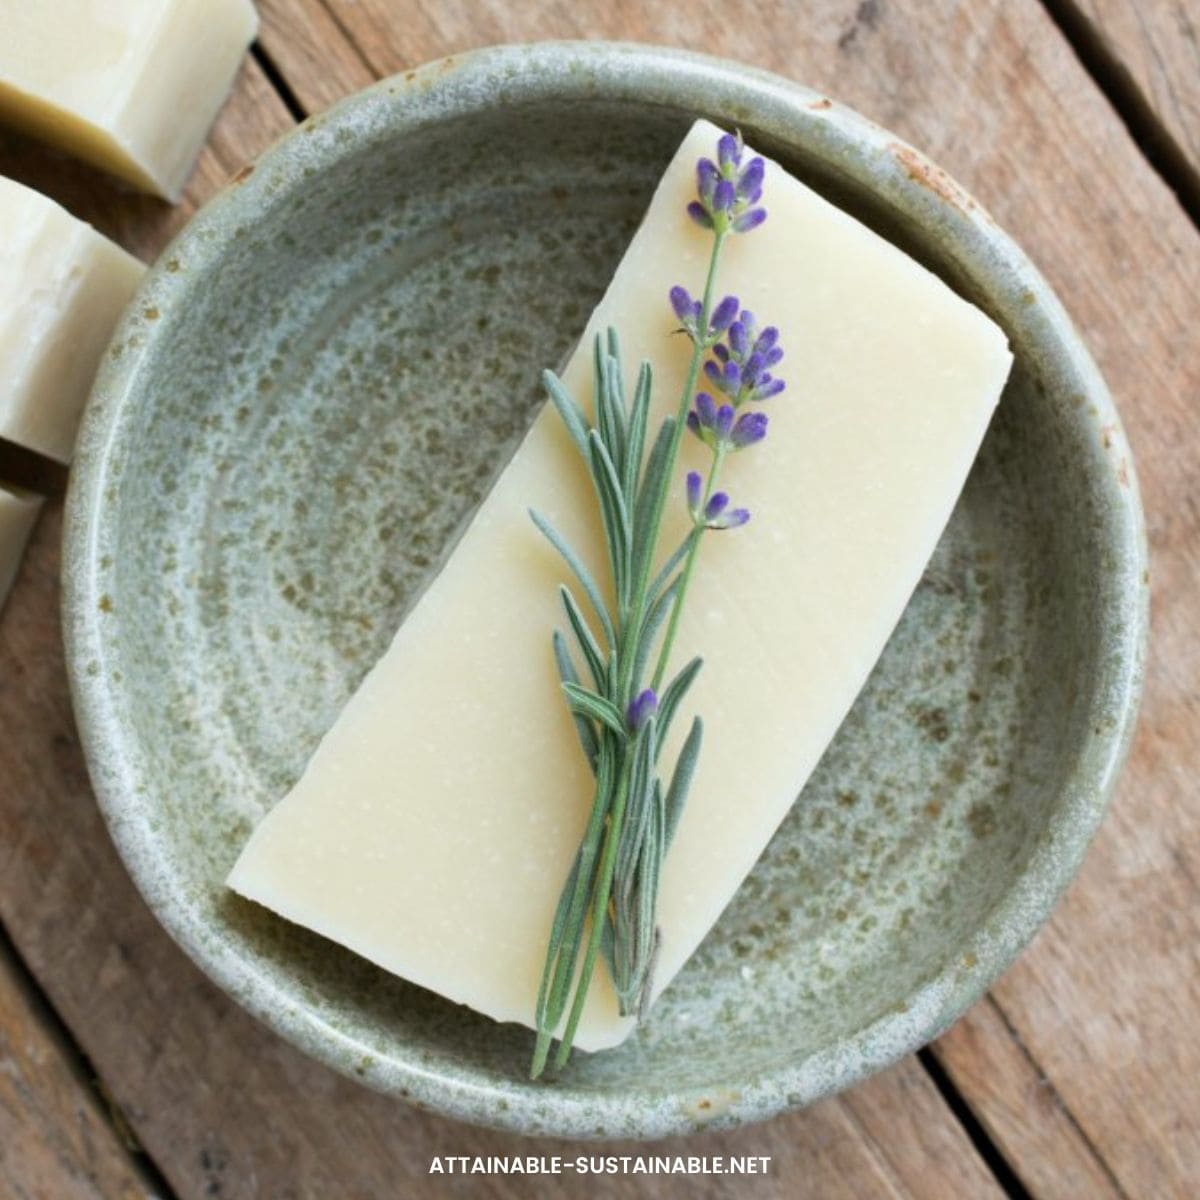 ivory colored bar of soap on a pottery dish, topped with a sprig of lavender.